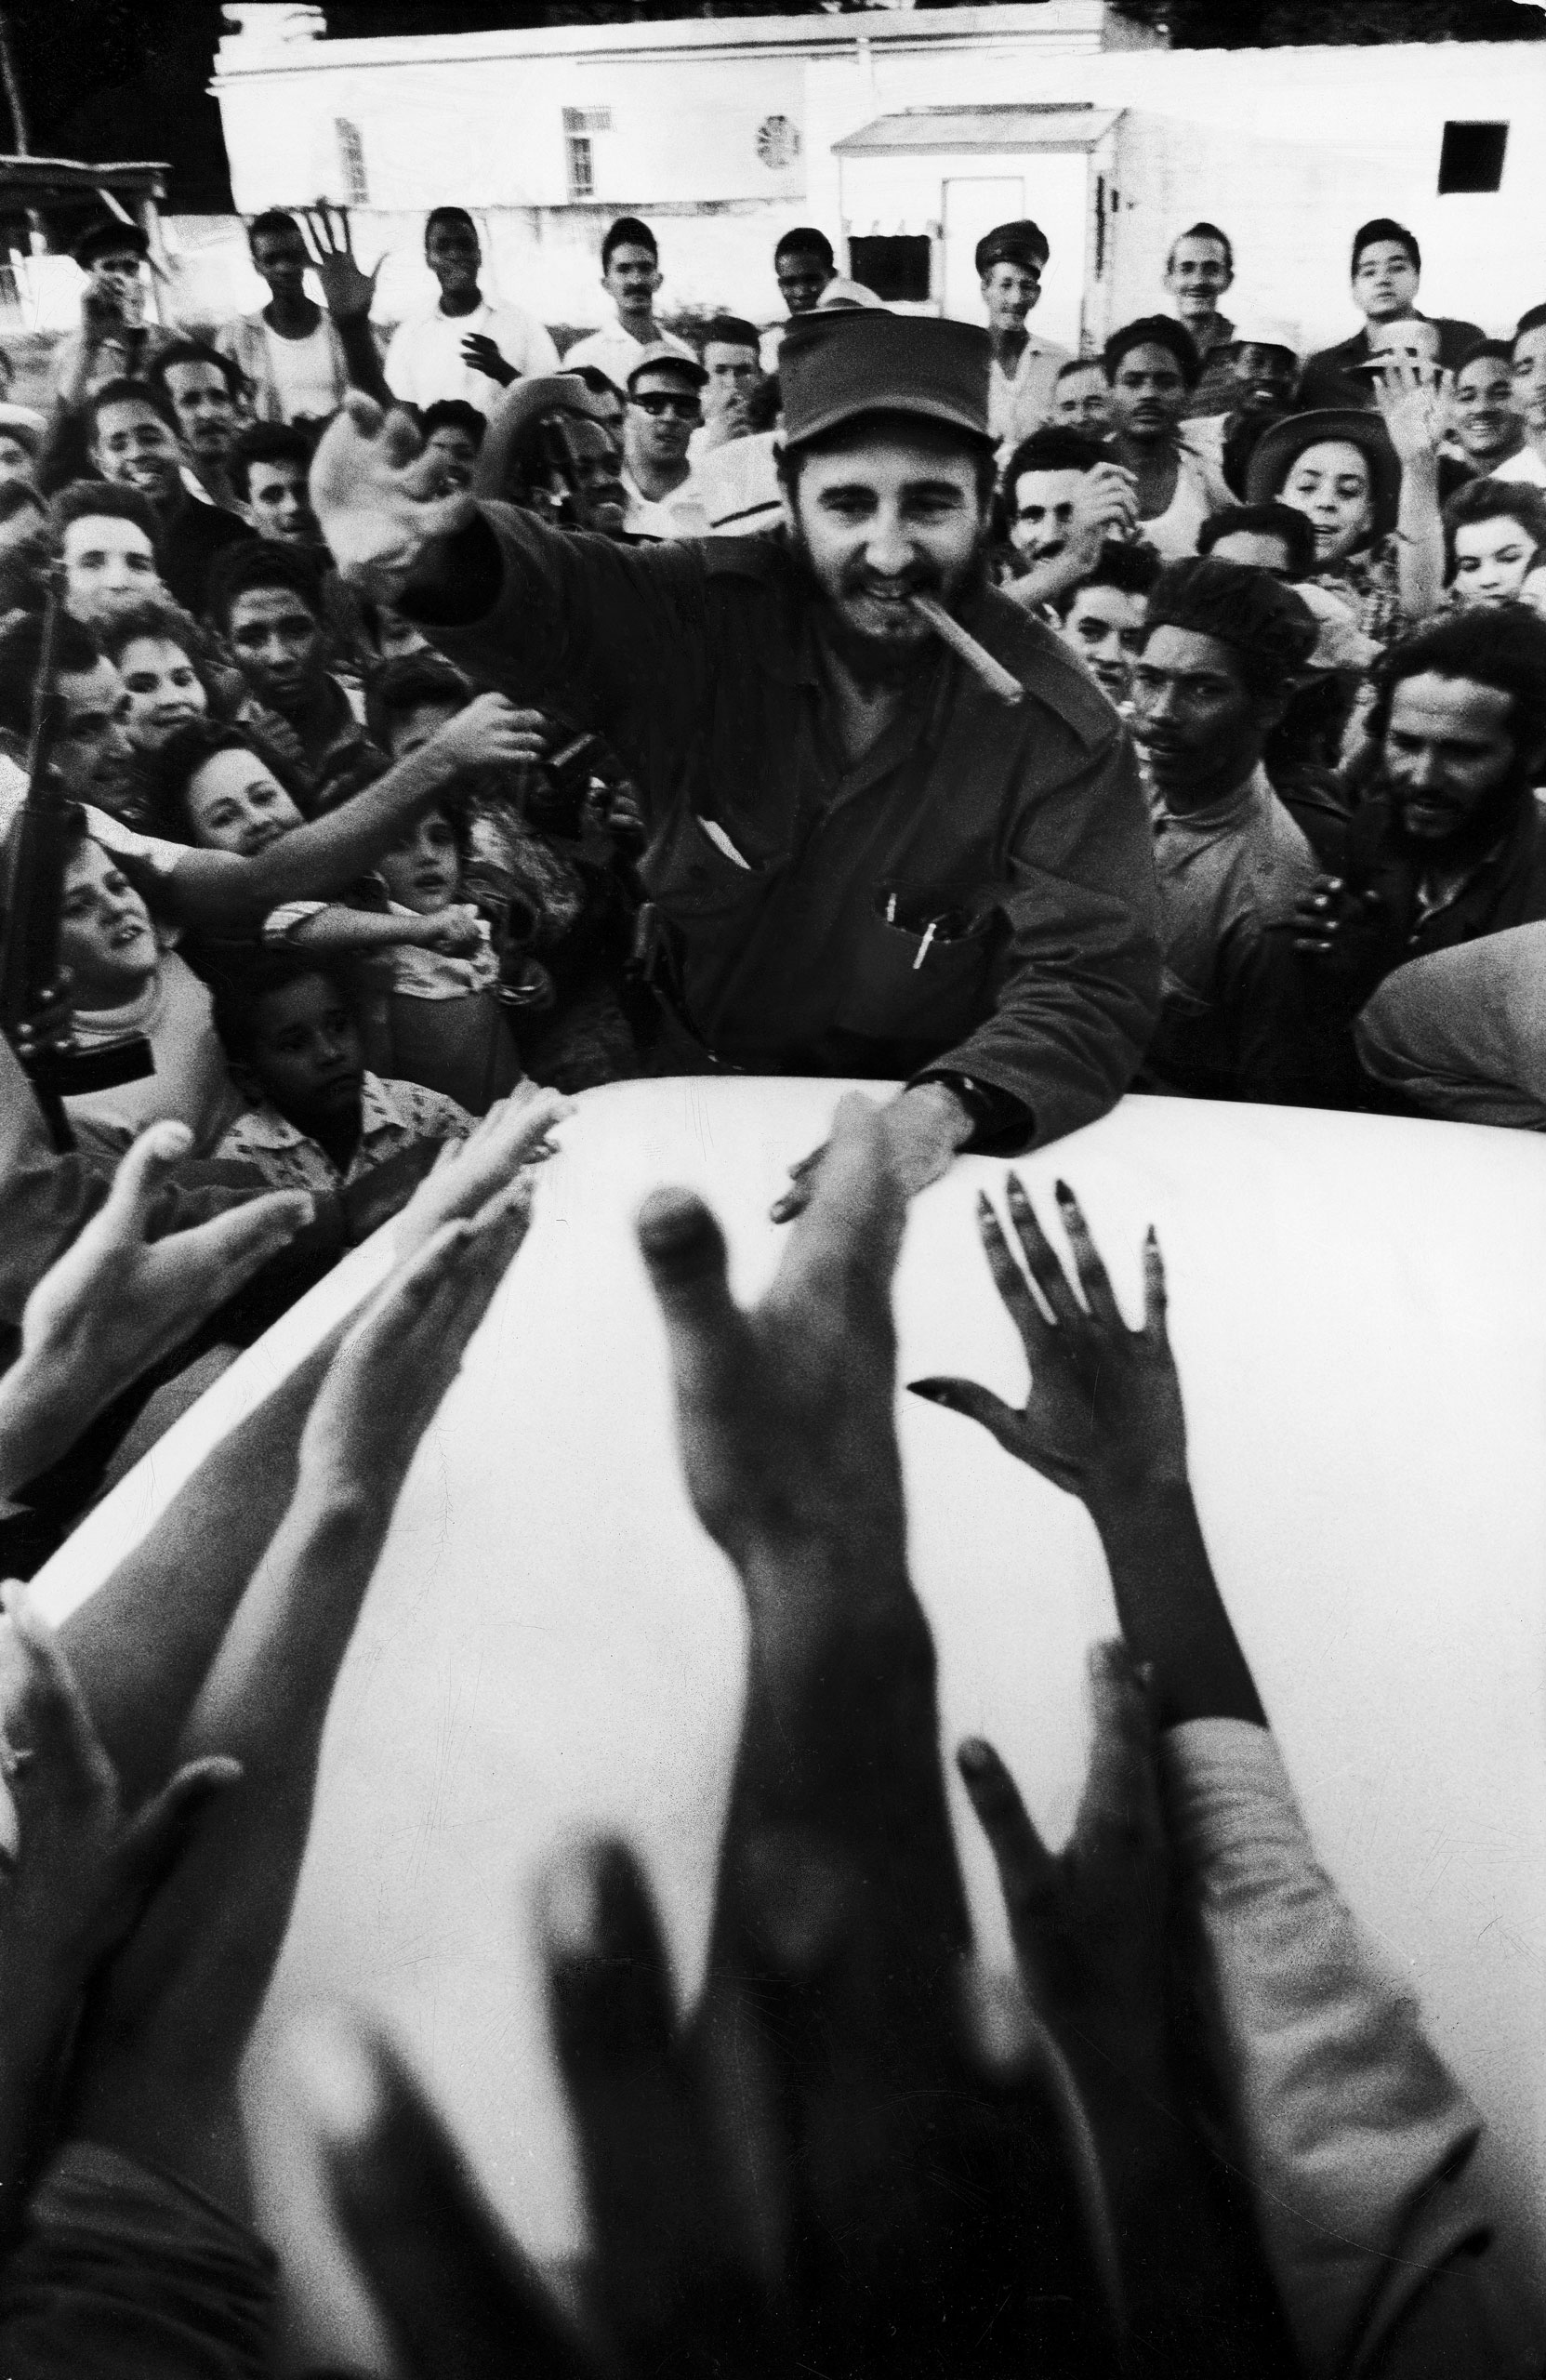 Fidel Castro cheered by crowds on victorious march to Havana after ousting Cuban dictator Fulgencio Batista, 1959.